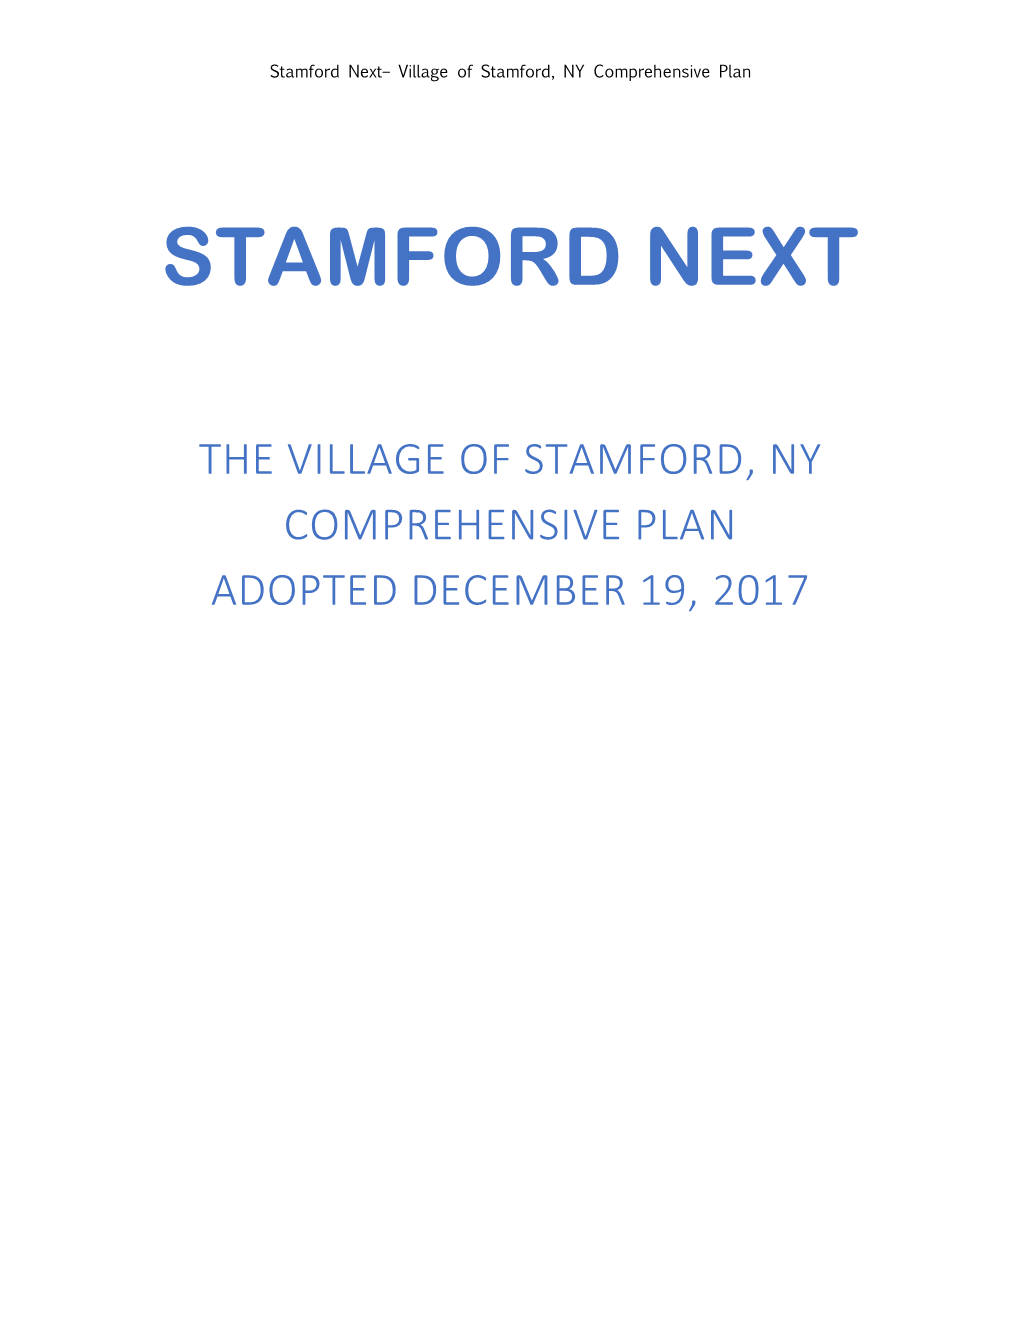 Stamford Next Final Adopted 12-19-17